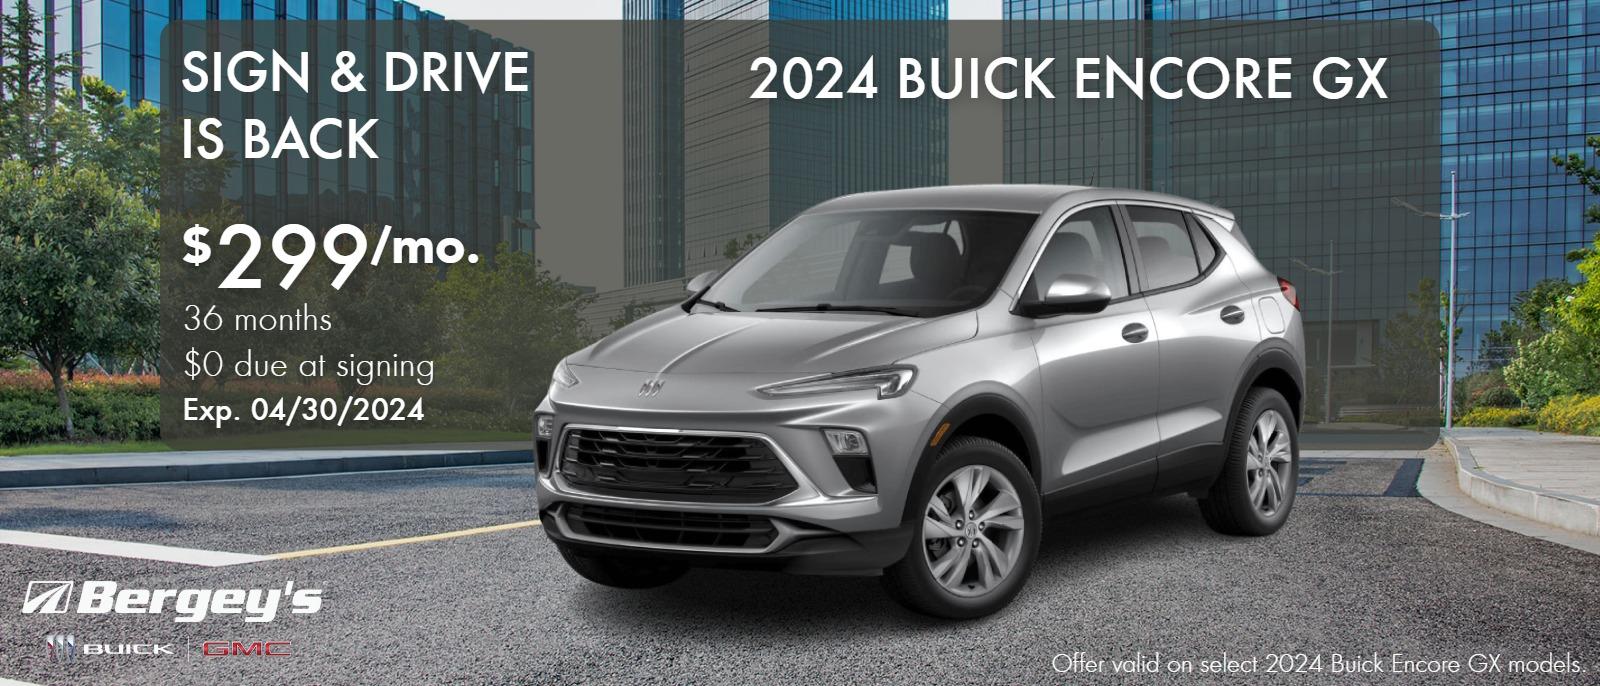 2024 Buick Encore GX
Lease $299/month for 36 months
$0 due at signing